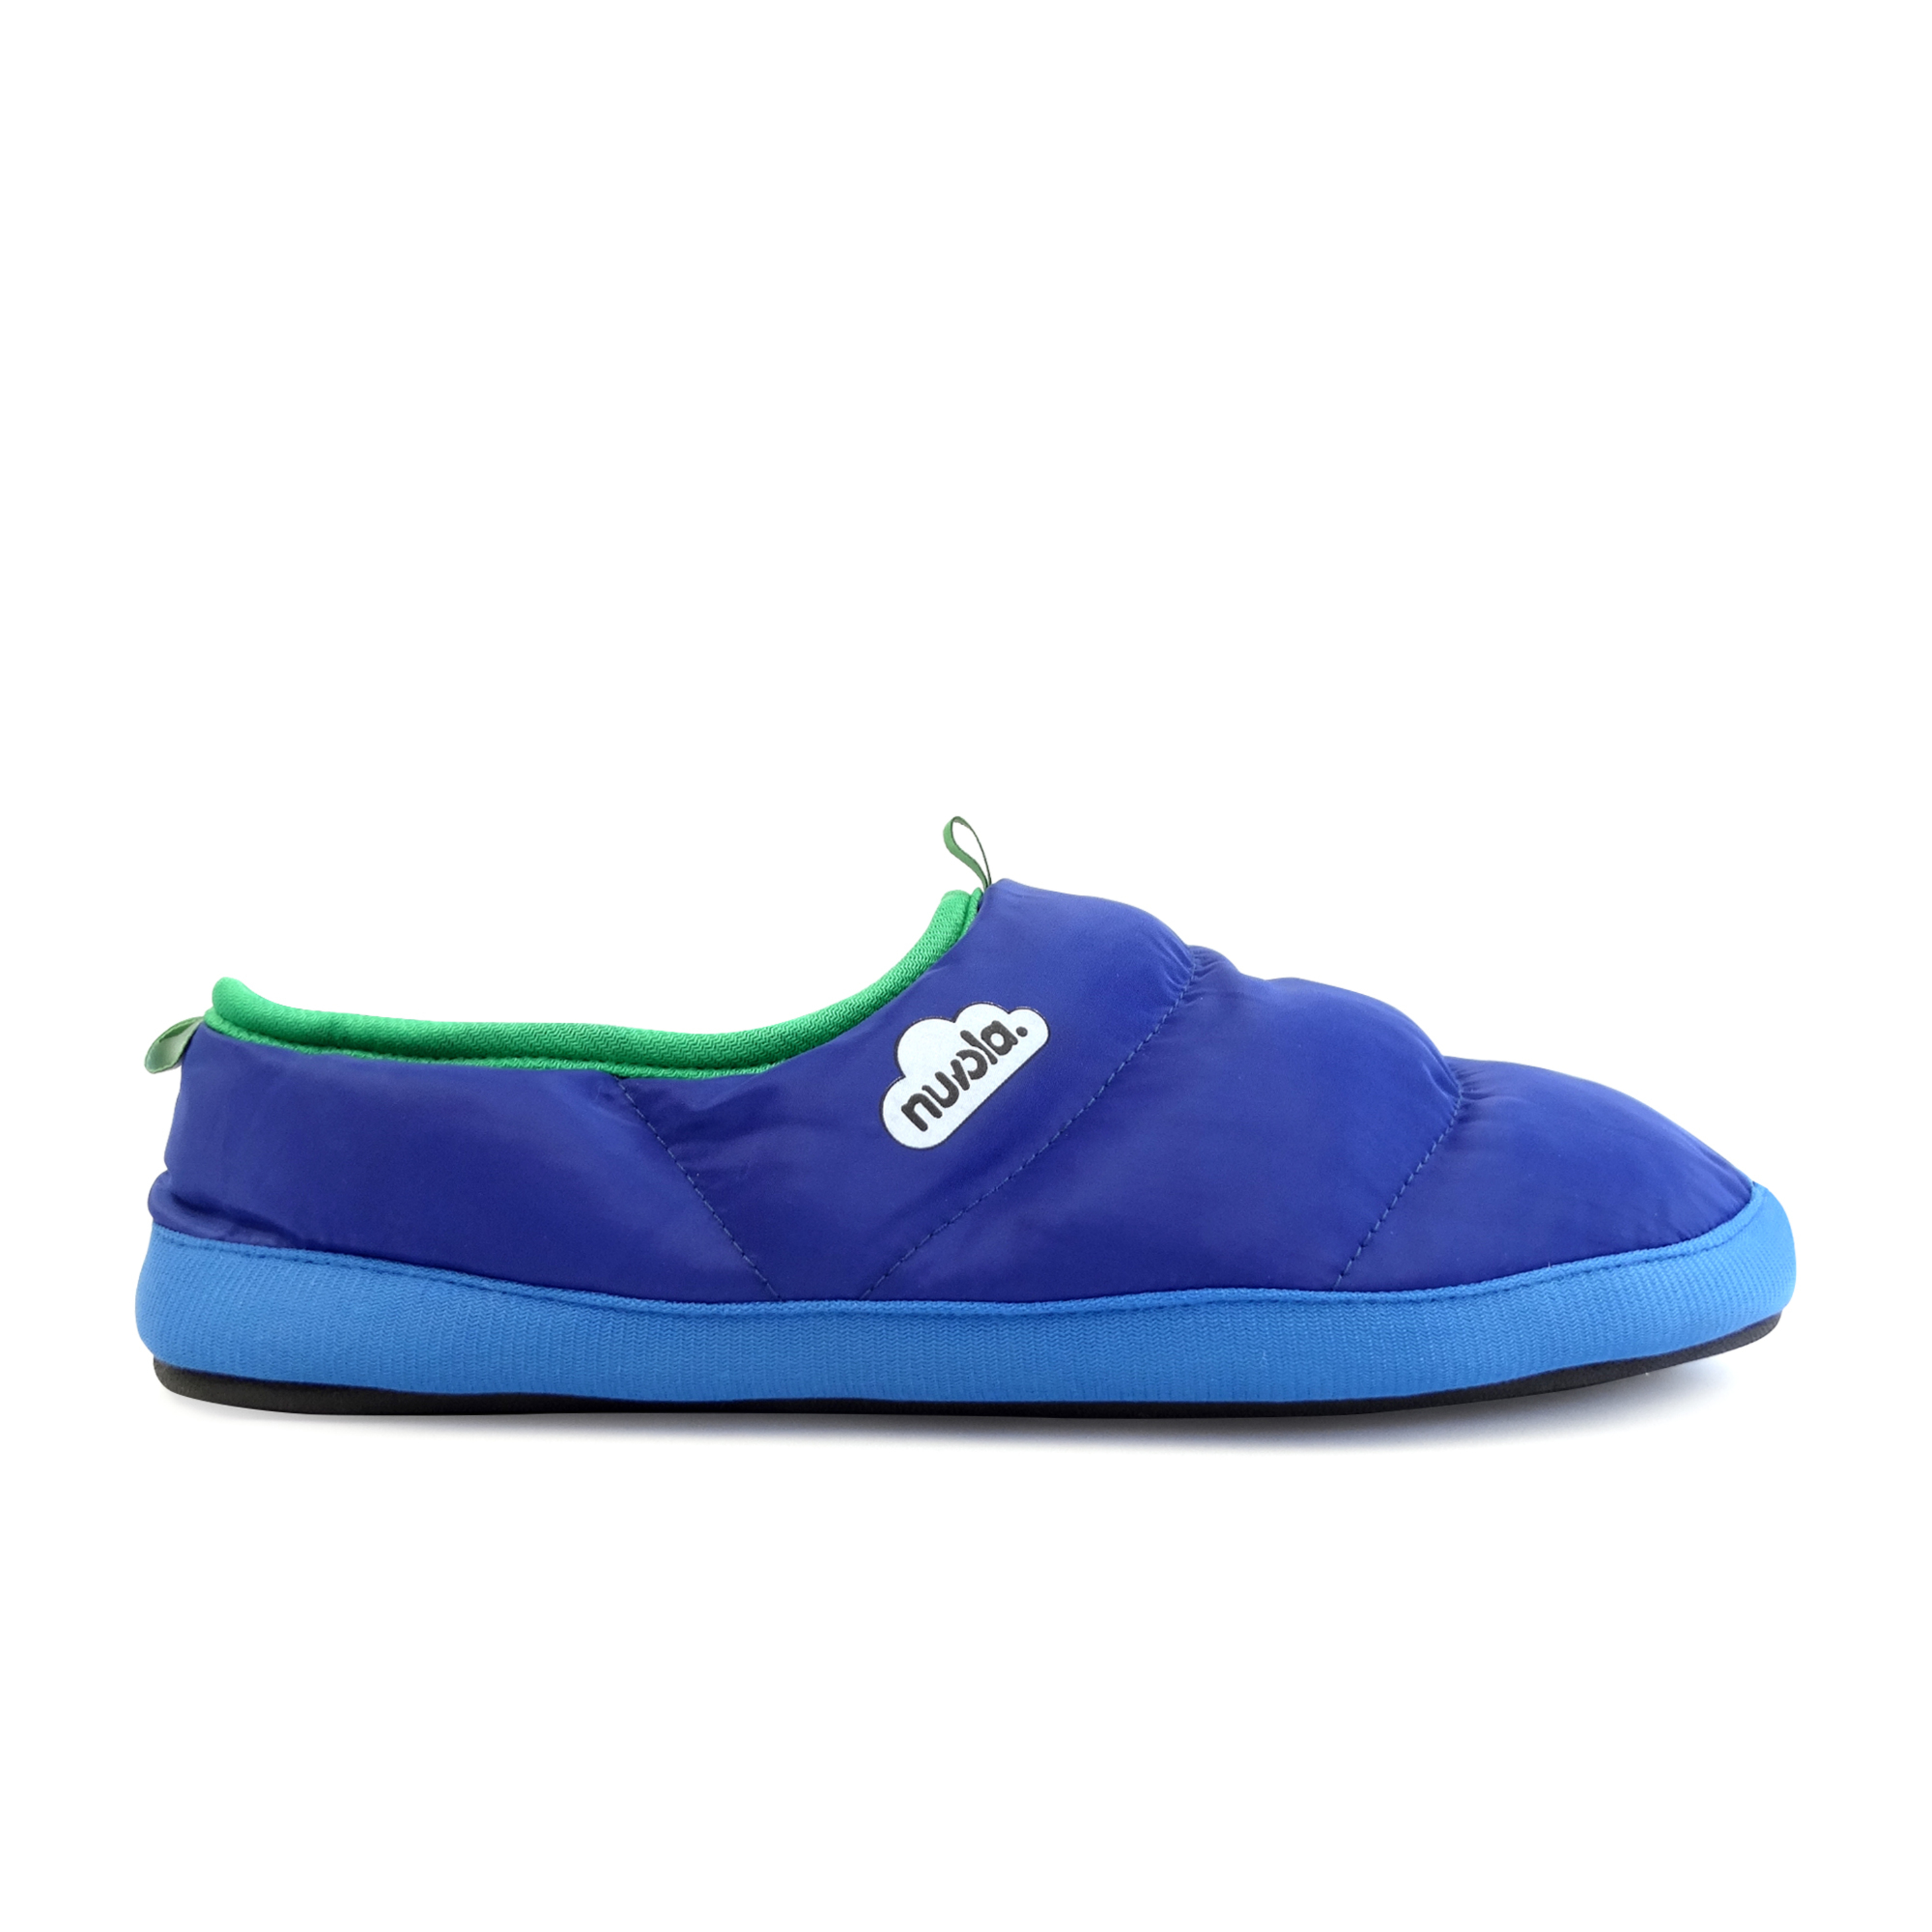 Slippers Camping Nuvola®,classic Party